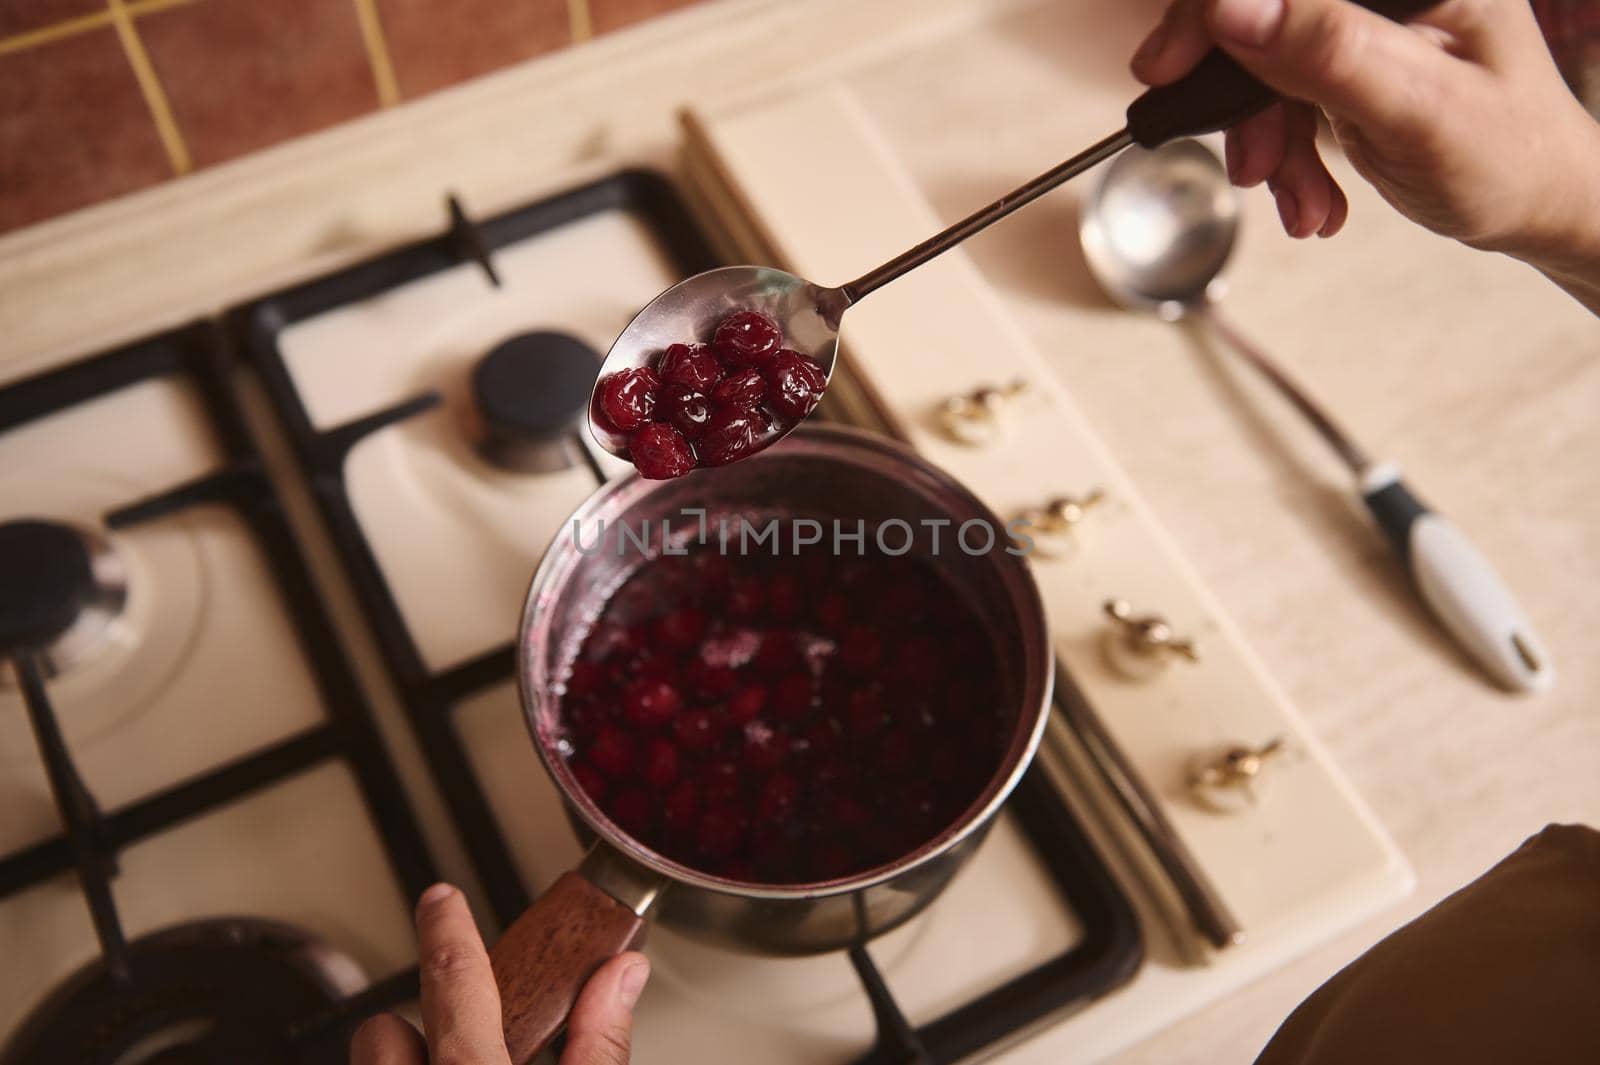 View from above of the hands of a chef confectioner standing by stove, using metal spoon stirring boiling jam of cherries with sugar while cooking homemade cherry berry confiture. Close-up